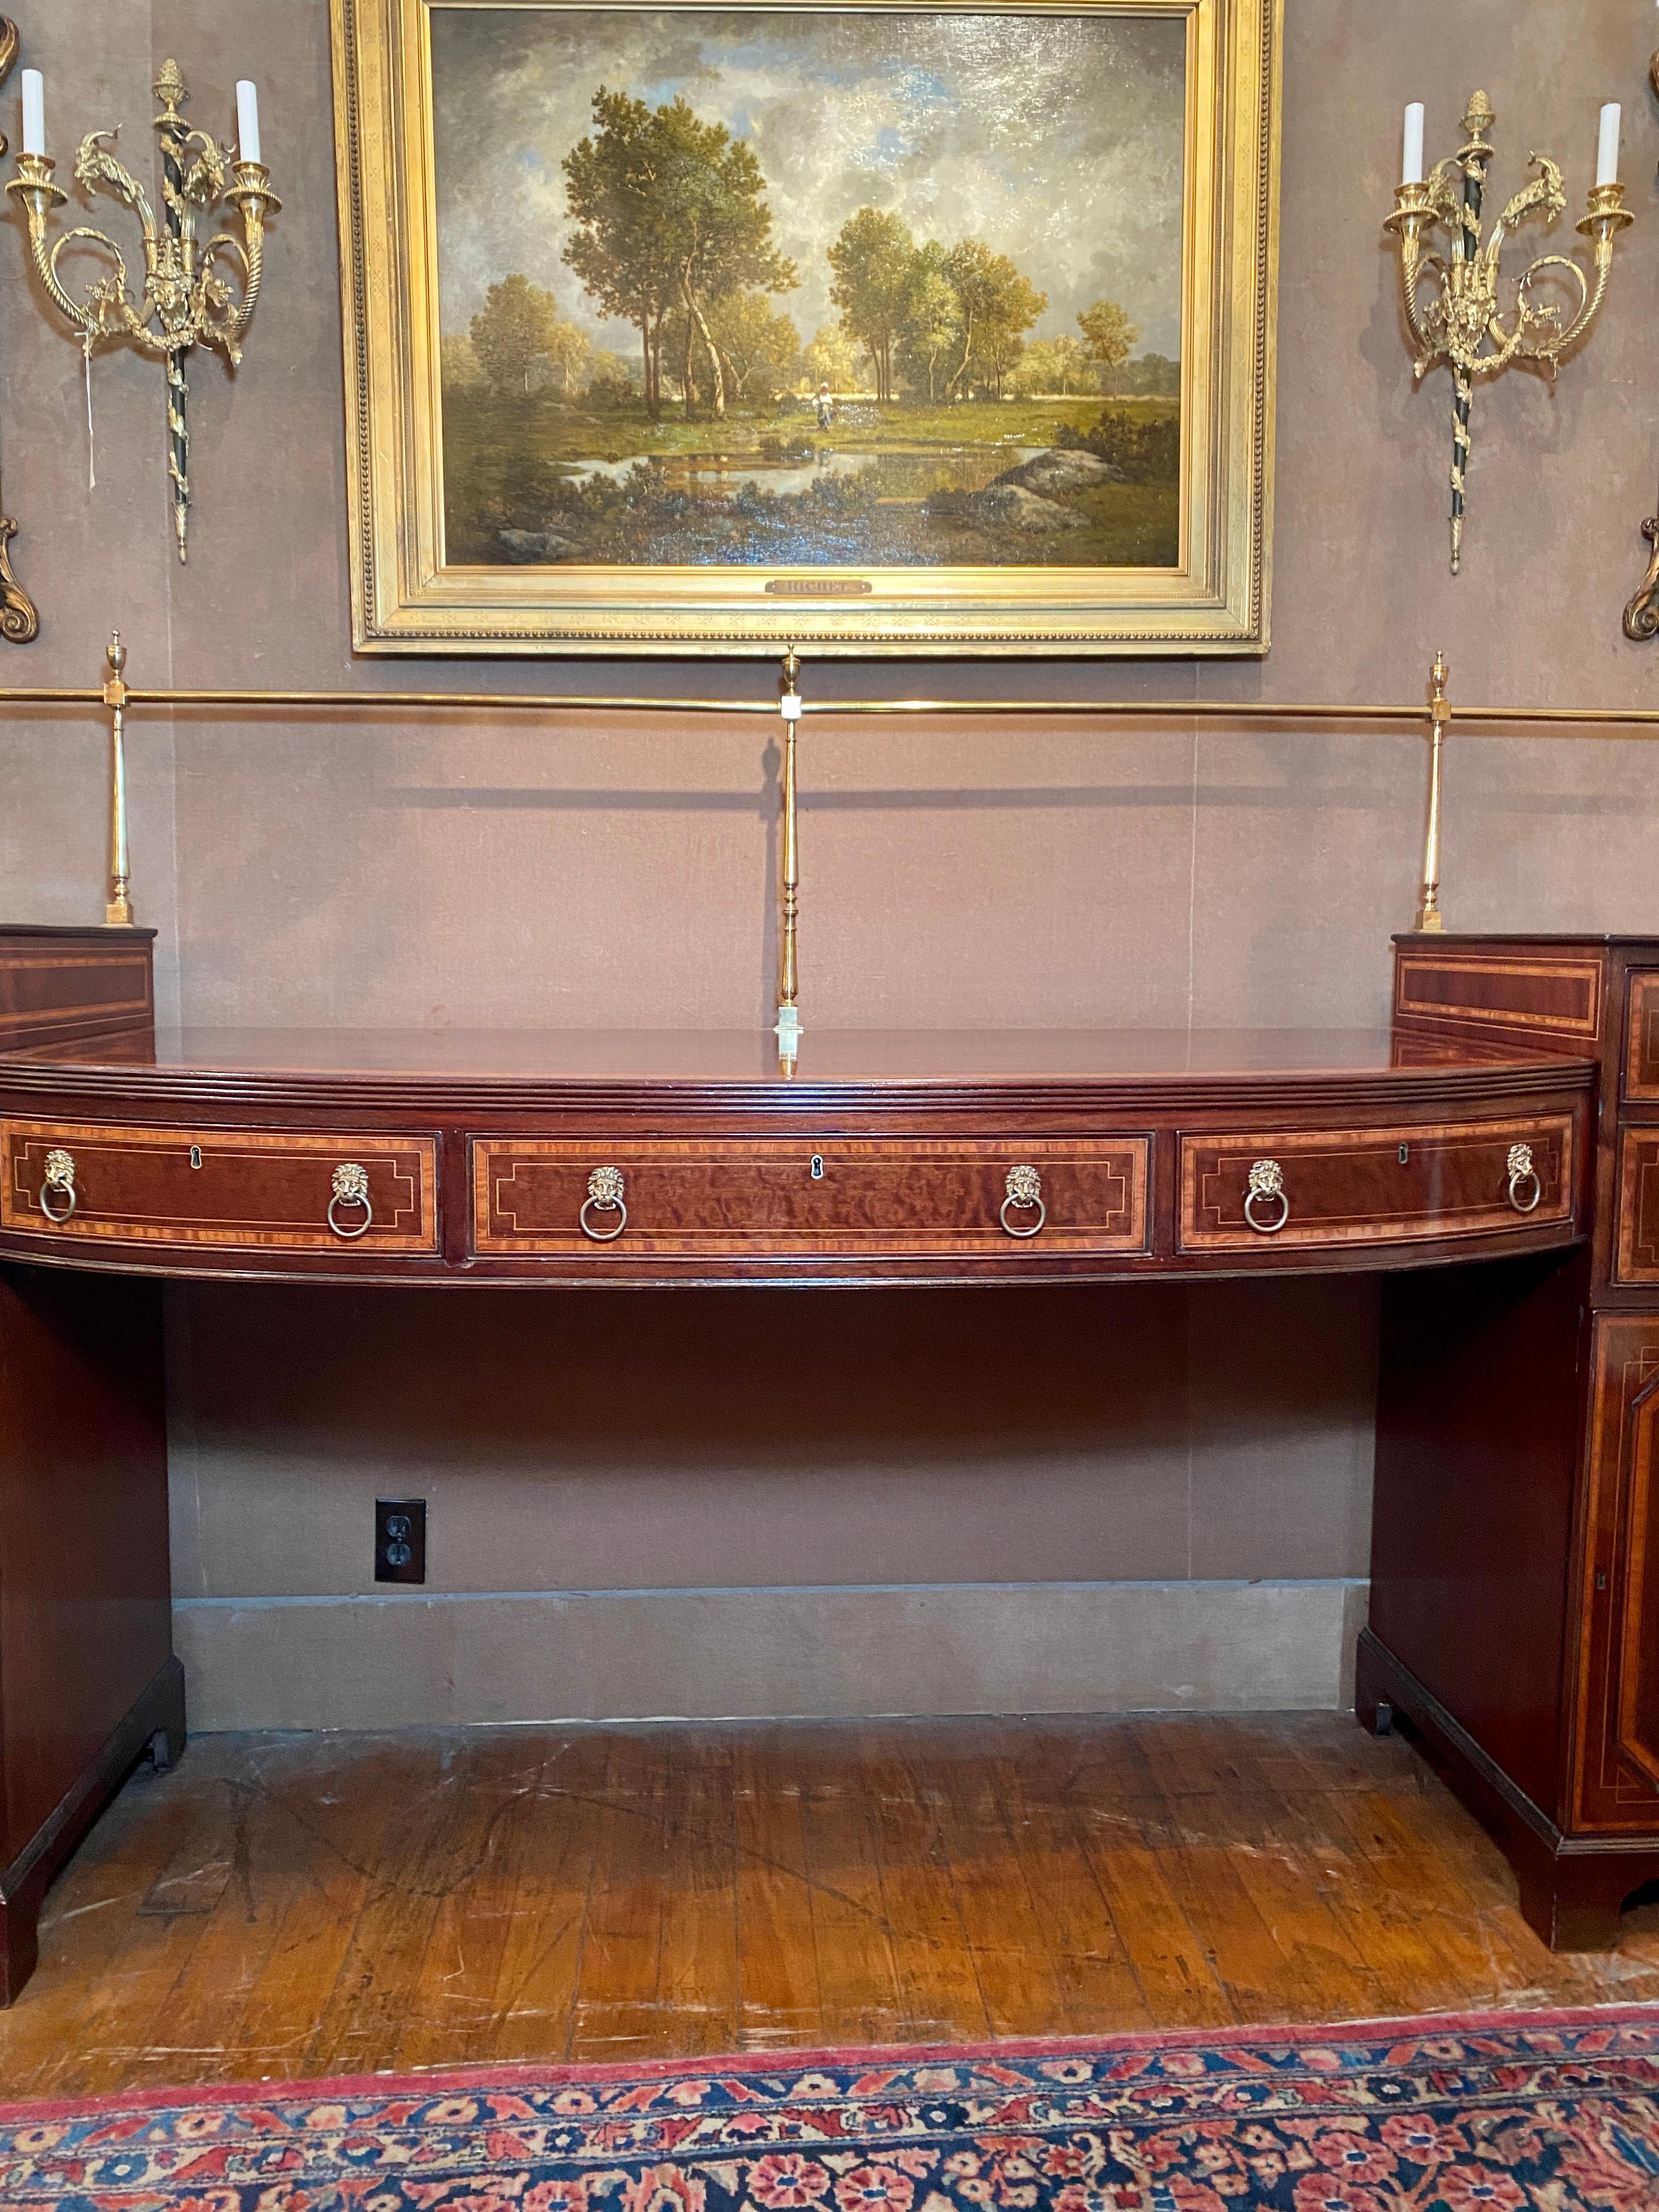 Antique English Sheraton Inlaid Mahogany Sideboard With Brass Rail, Circa 1870's In Good Condition For Sale In New Orleans, LA